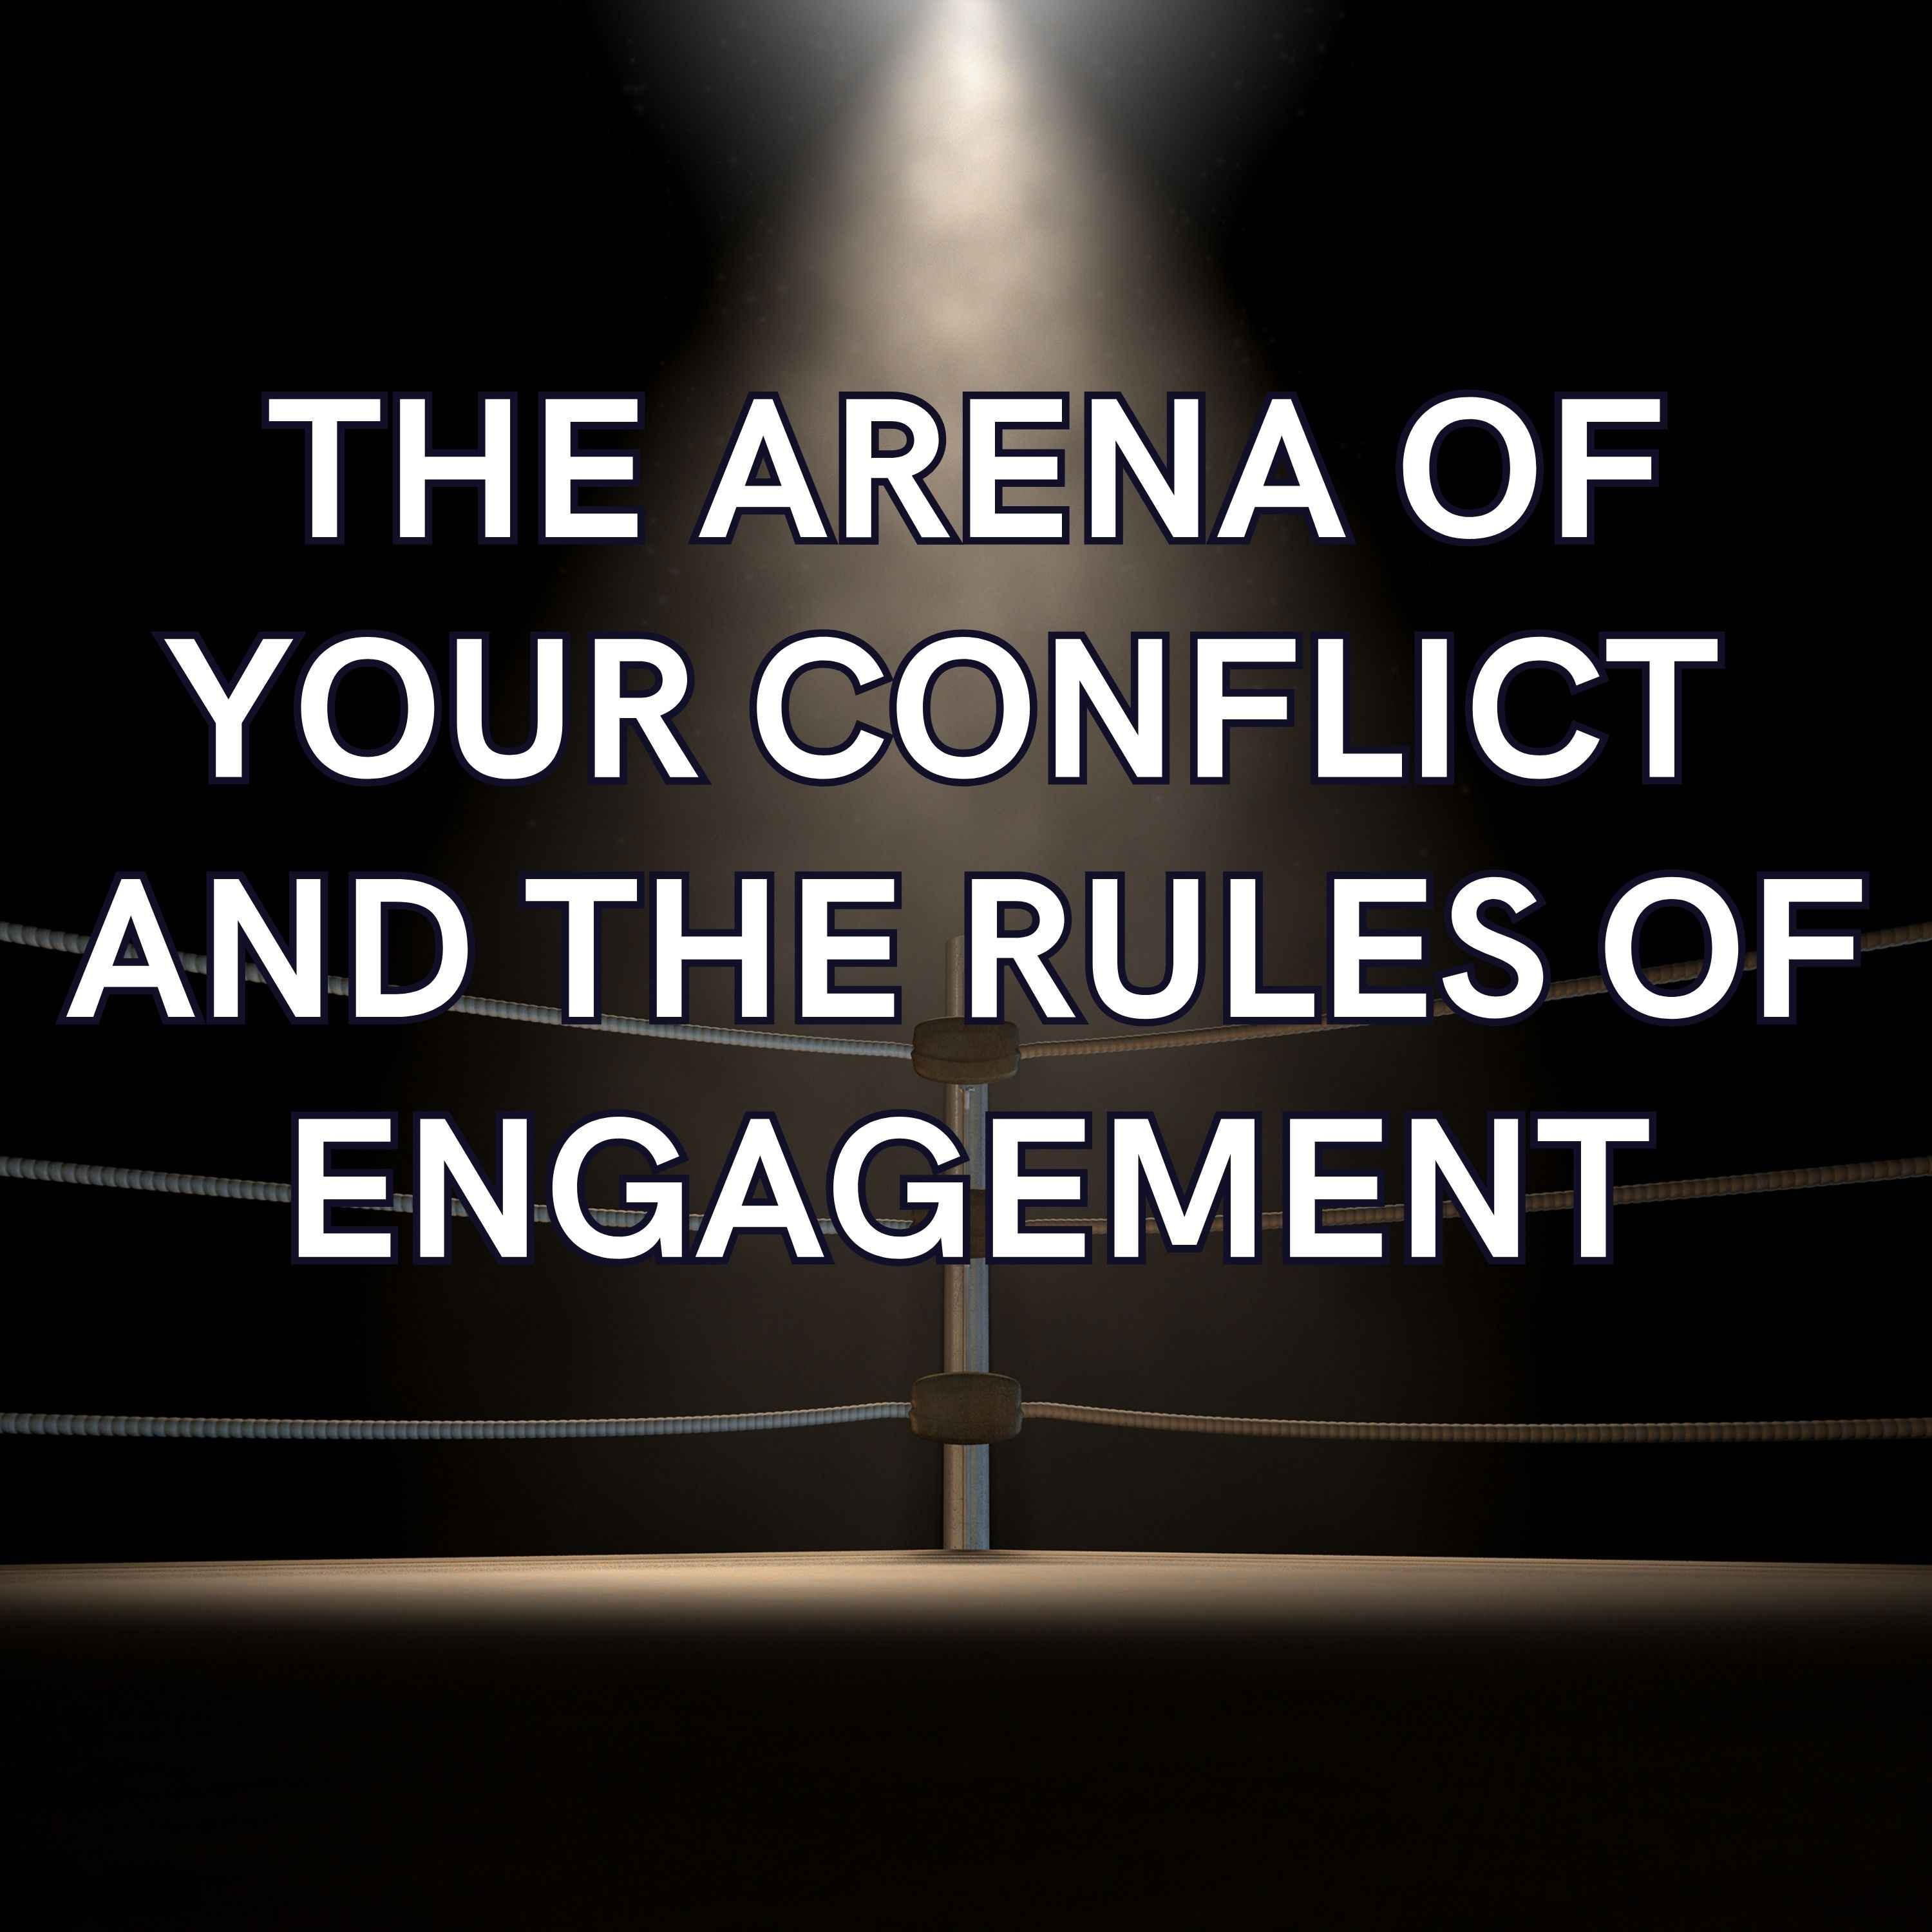 The Arena of your Conflict and the Rules of Engagement